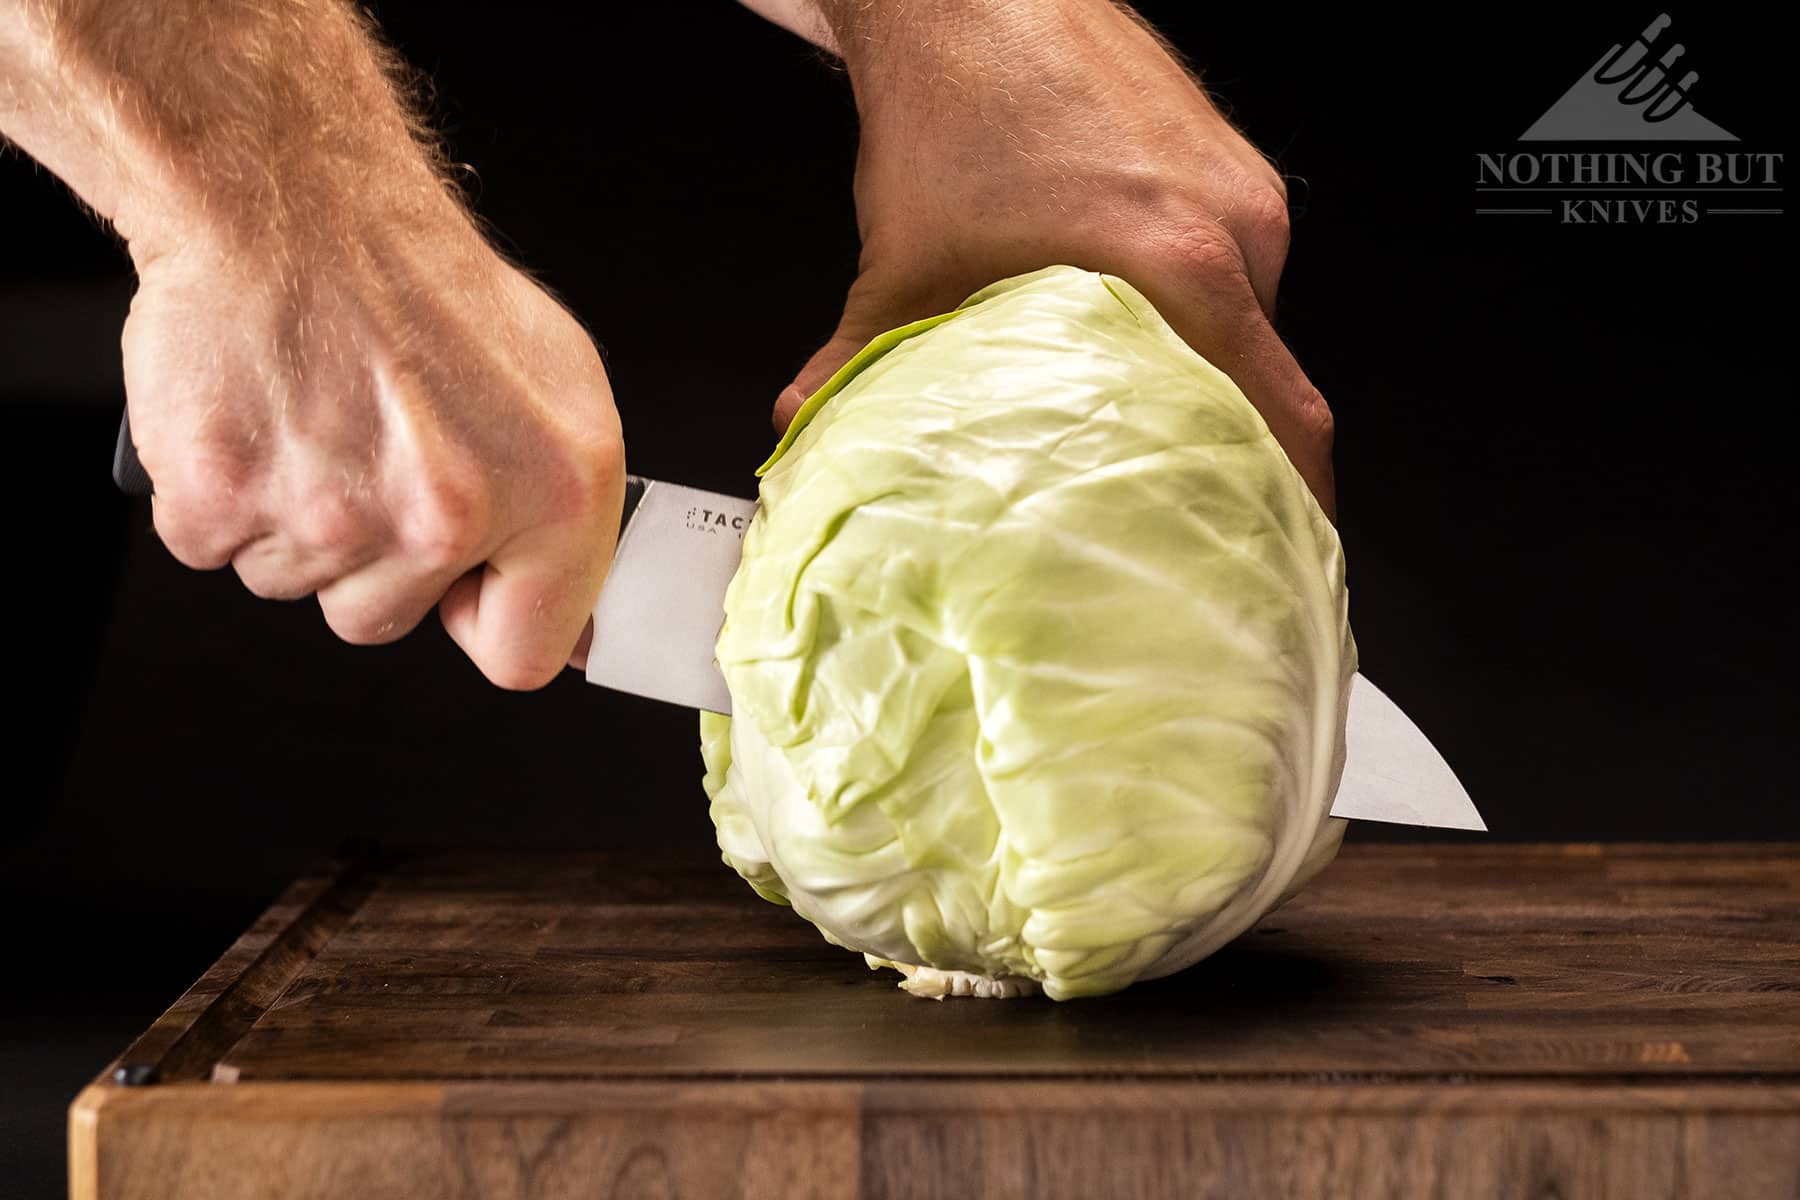 The 8 inch Tactile Santoku Knife slicing a head of cabbage in half.